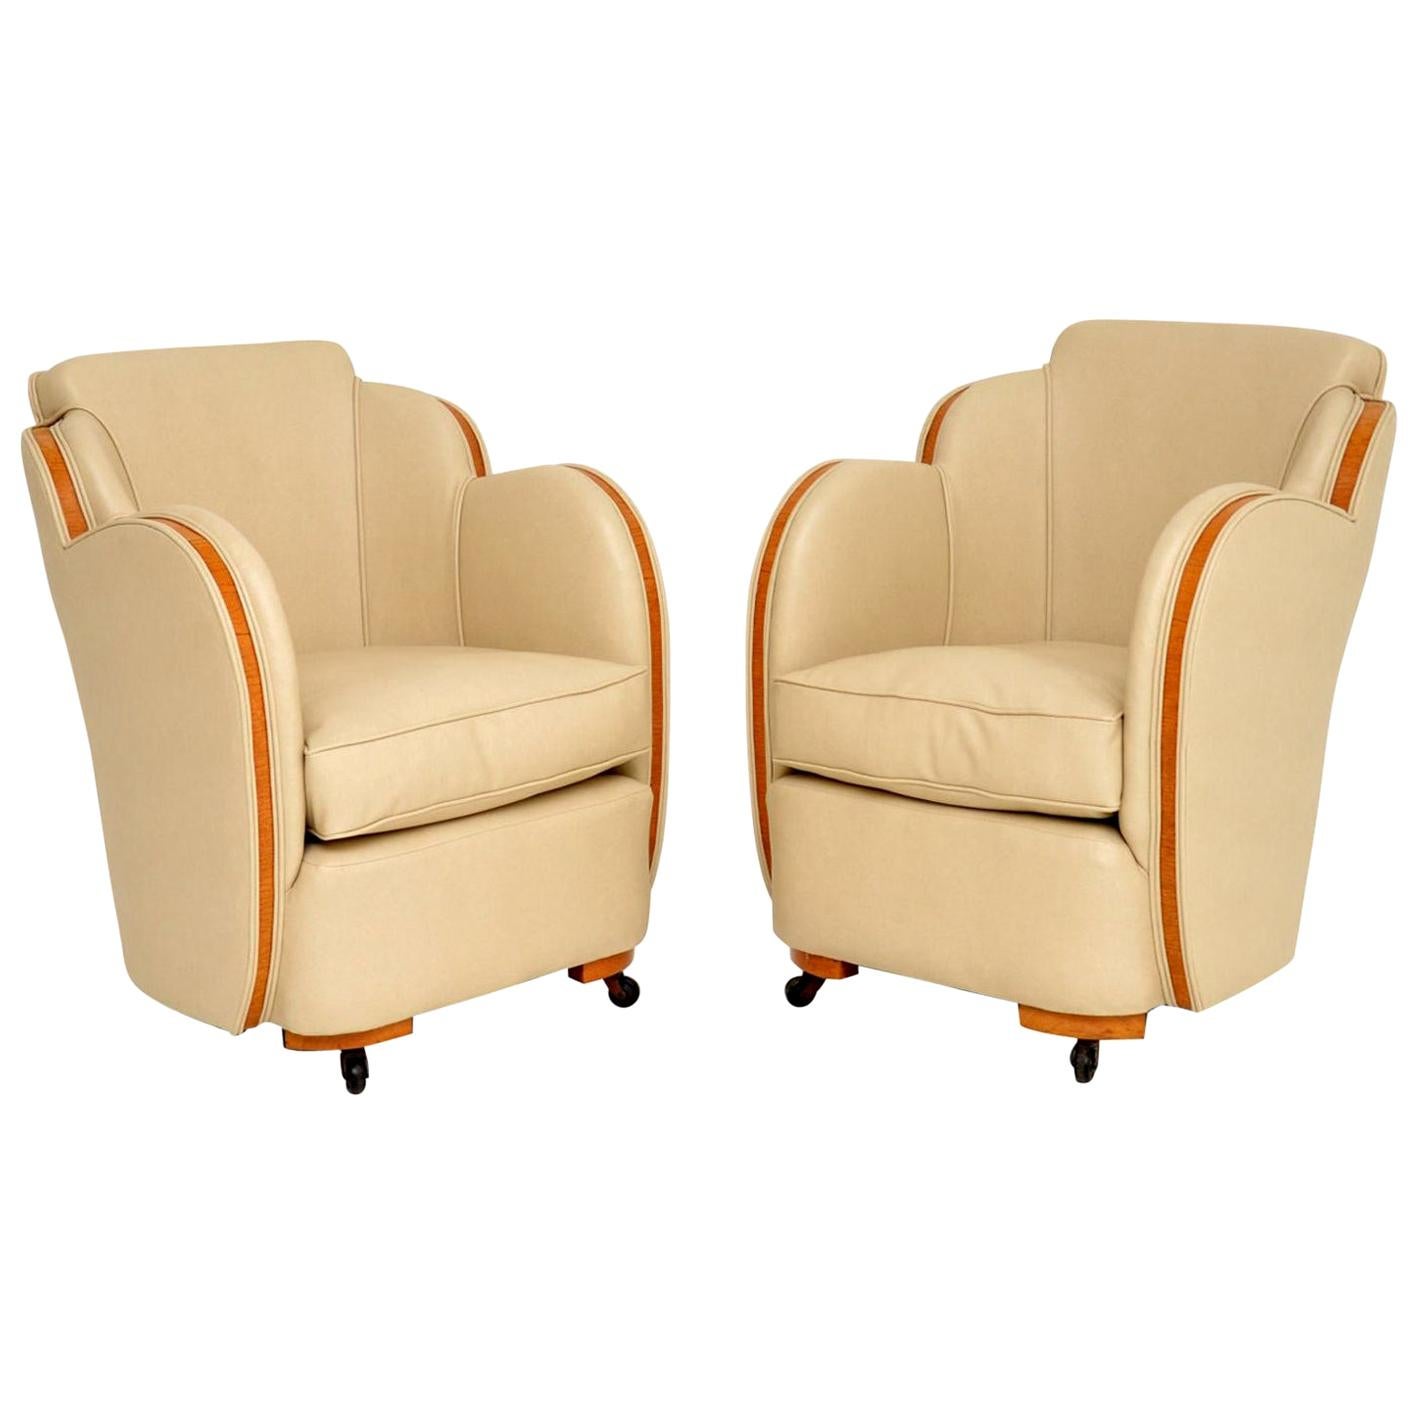 Pair of Original Art Deco Cloud Back Armchairs by Epstein